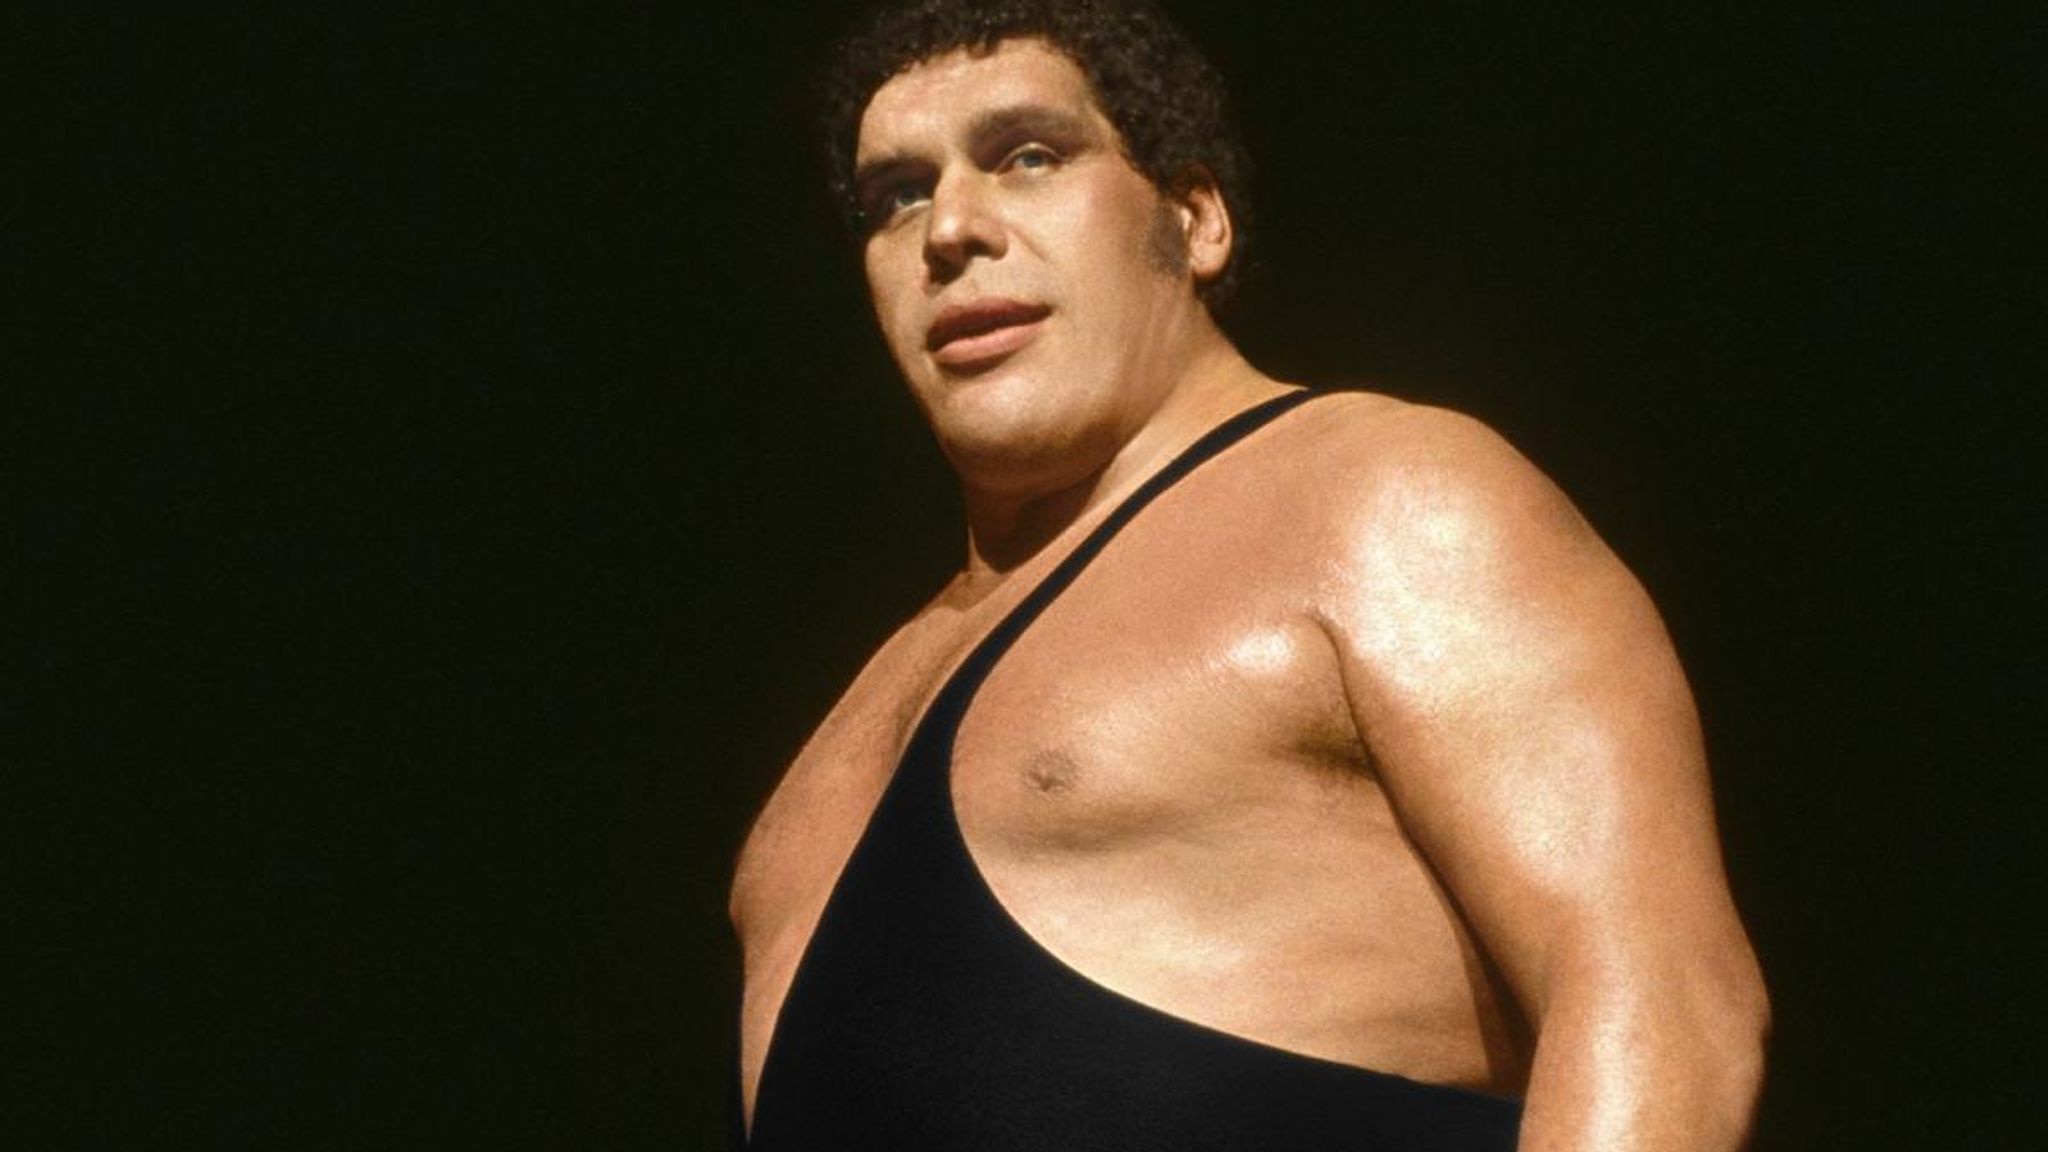 Andre The Giant's unique life story comes to Sky Documentaries | News News | Sky Sports